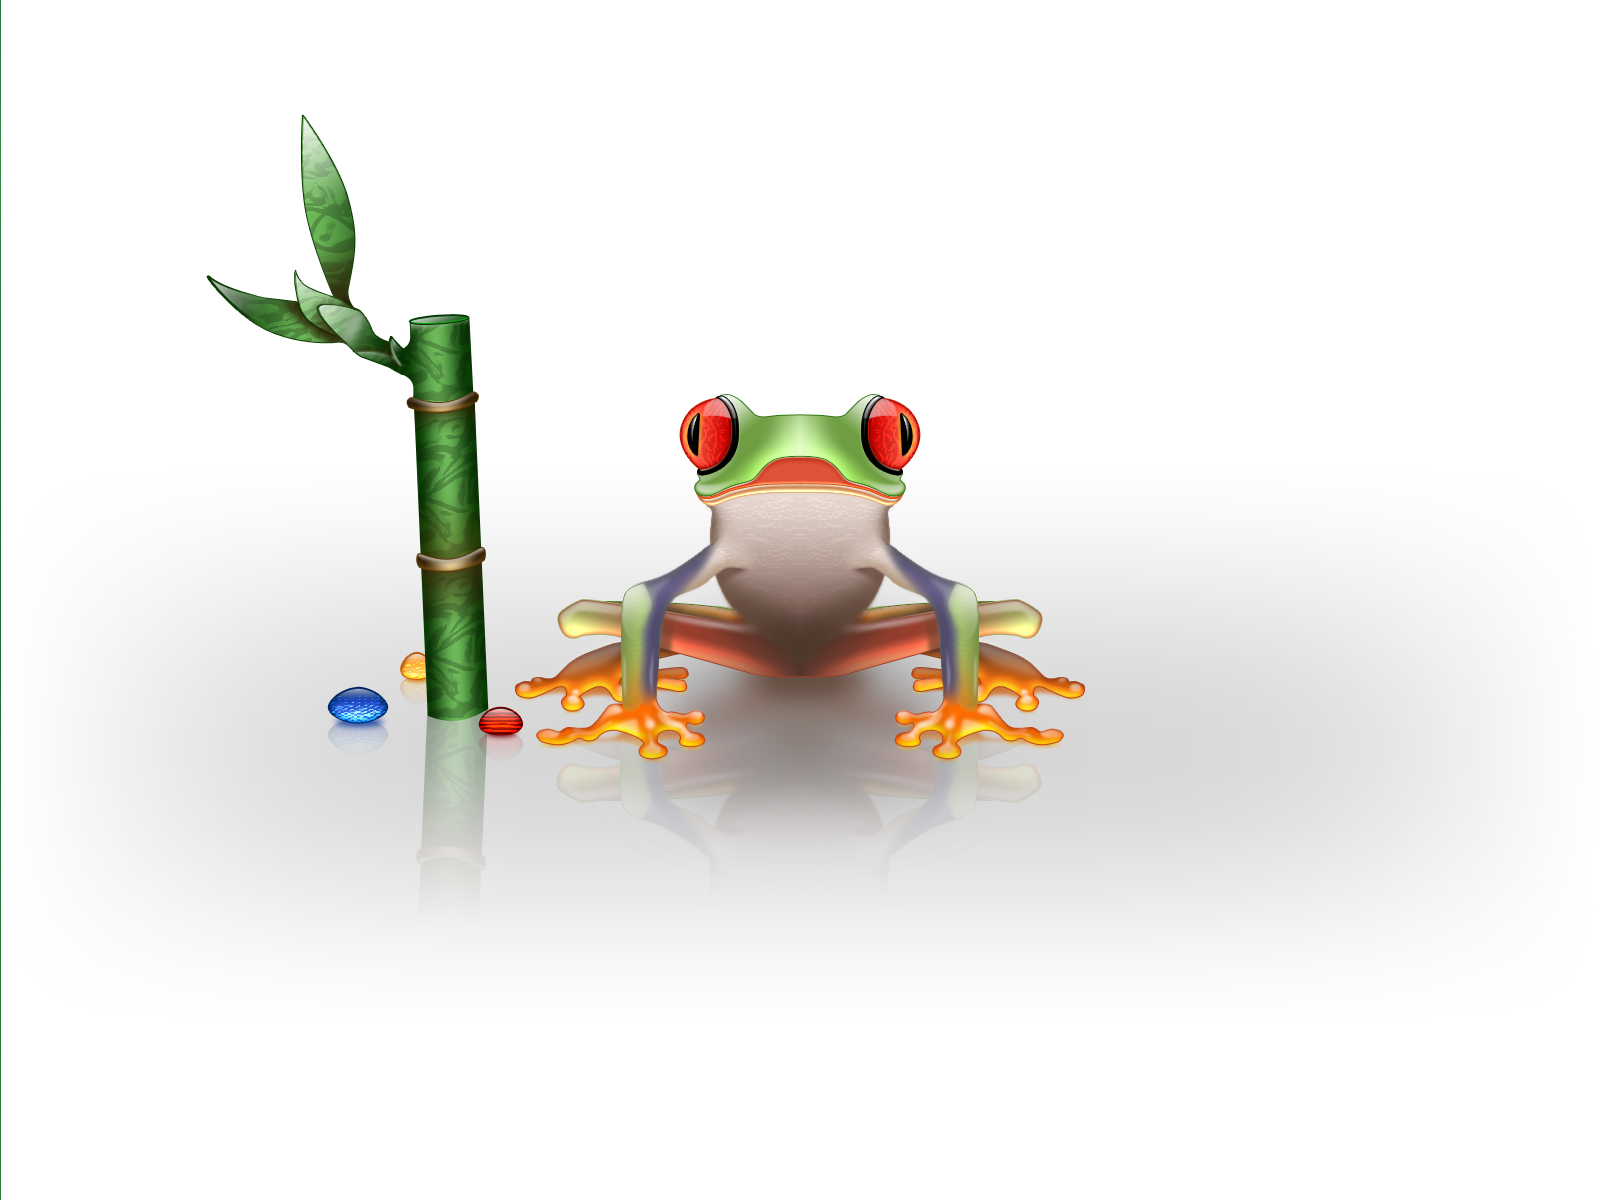 Frog 2 frog-wallpaper-19 – Free Wallpapers Share this wallpaper